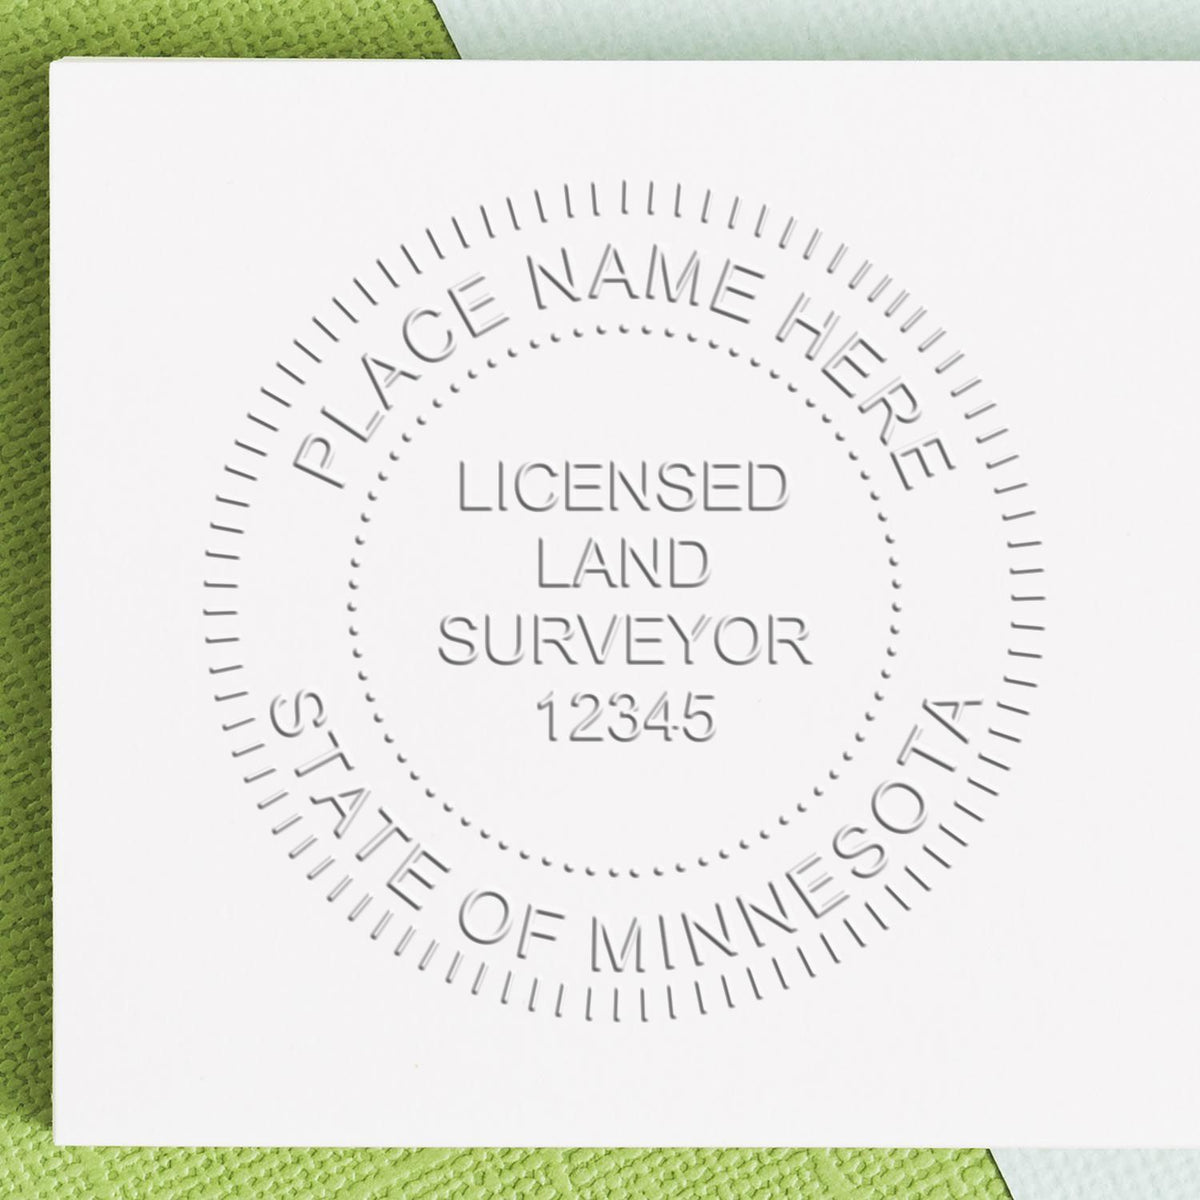 The Long Reach Minnesota Land Surveyor Seal stamp impression comes to life with a crisp, detailed photo on paper - showcasing true professional quality.